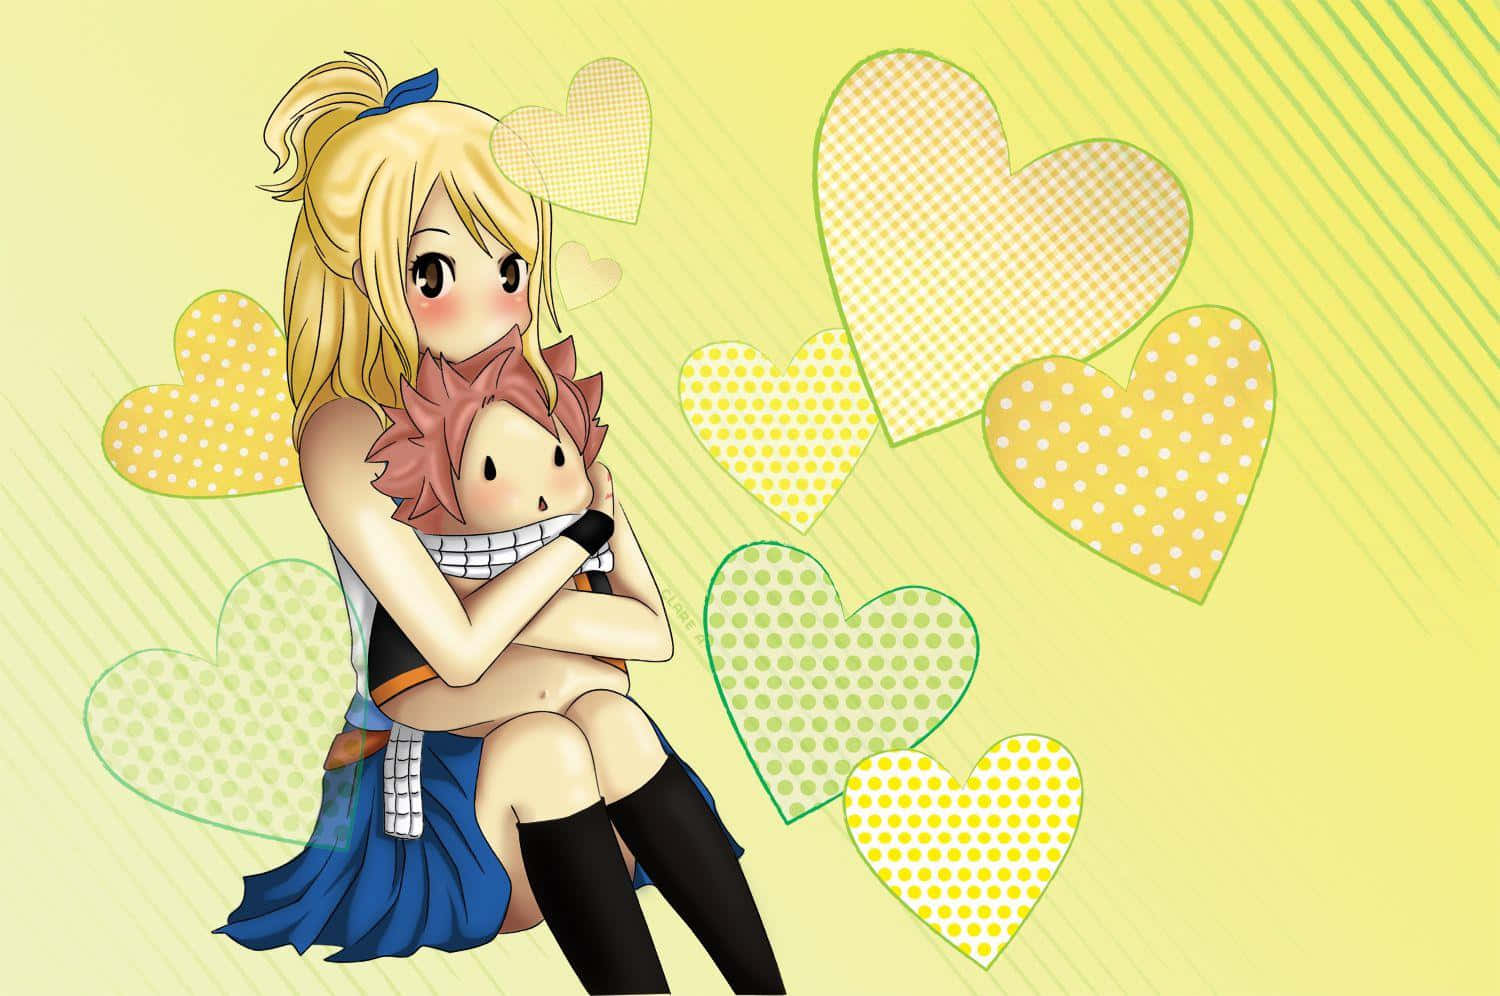 Magical Adventure Awaits - Lucy Heartfilia In A Fantasy World Background